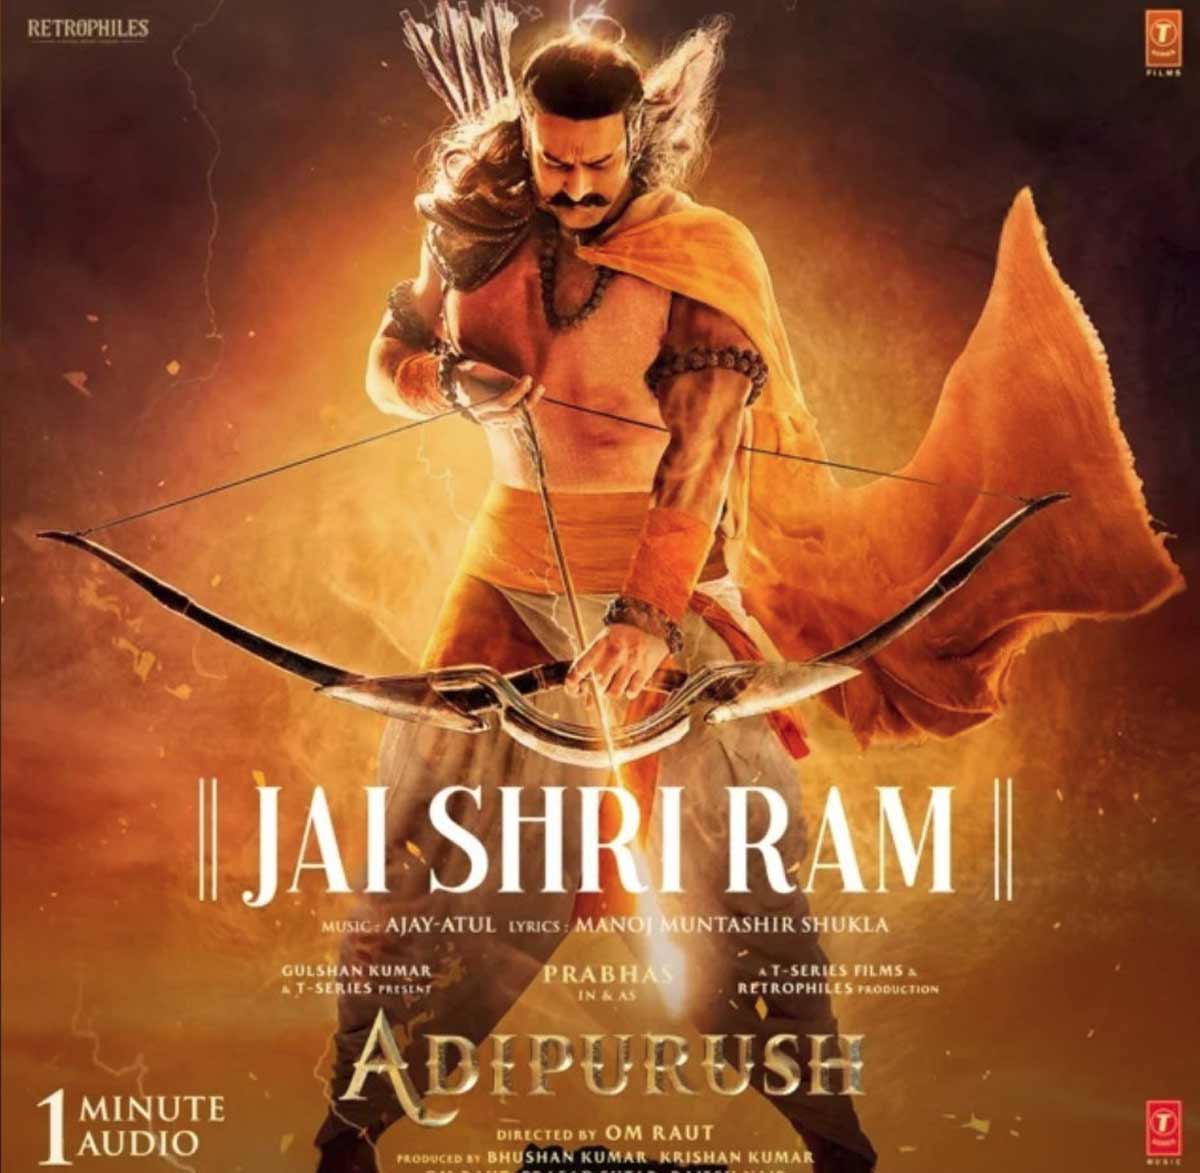 Adipurush: A Closer Look at the New Motion Poster